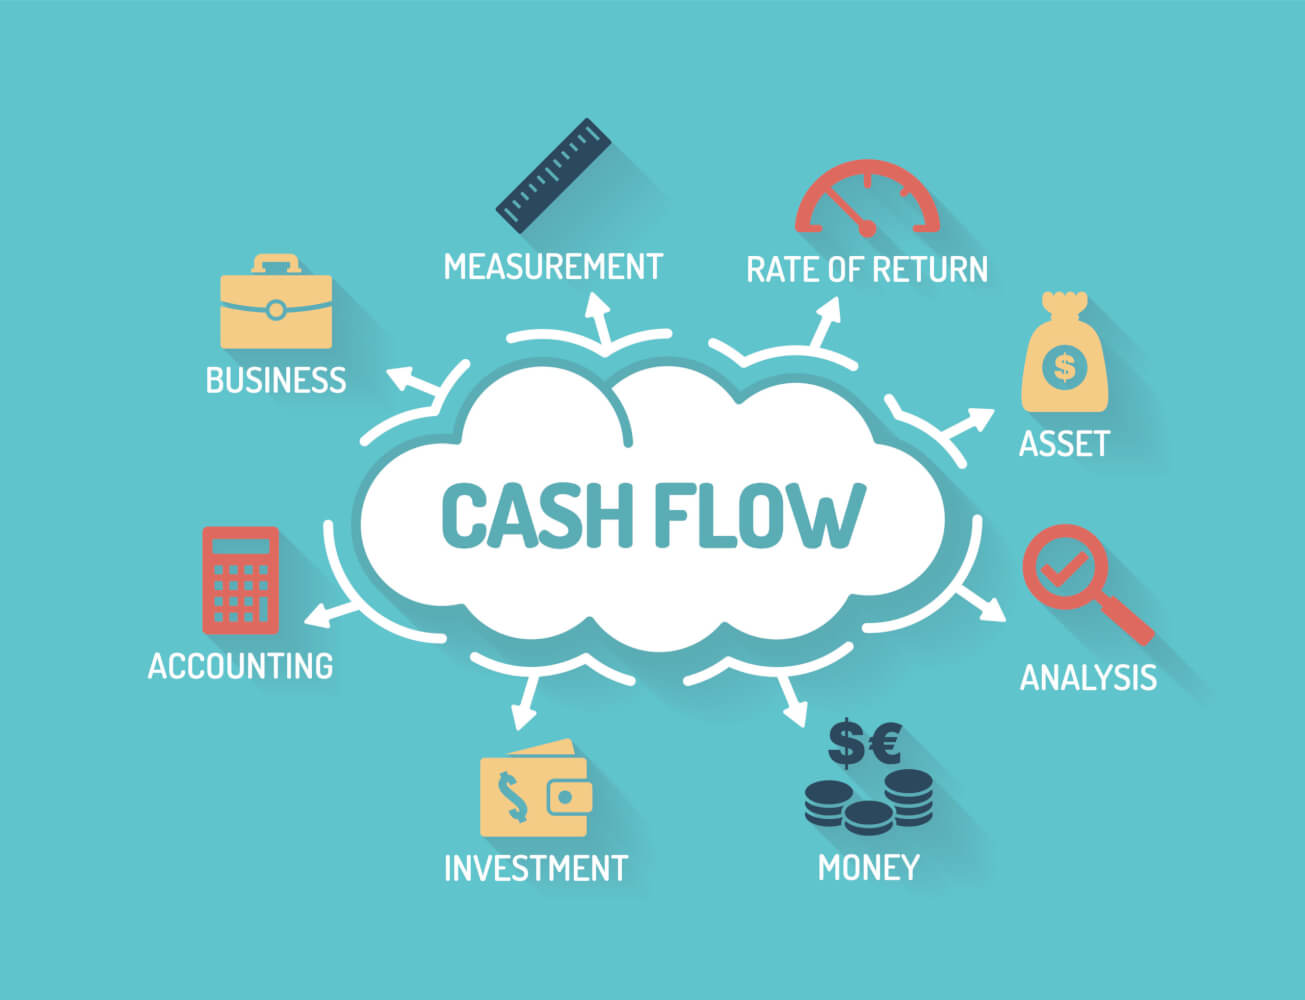 MSME Credit: Cash Flow Lending and Invoice Discounting